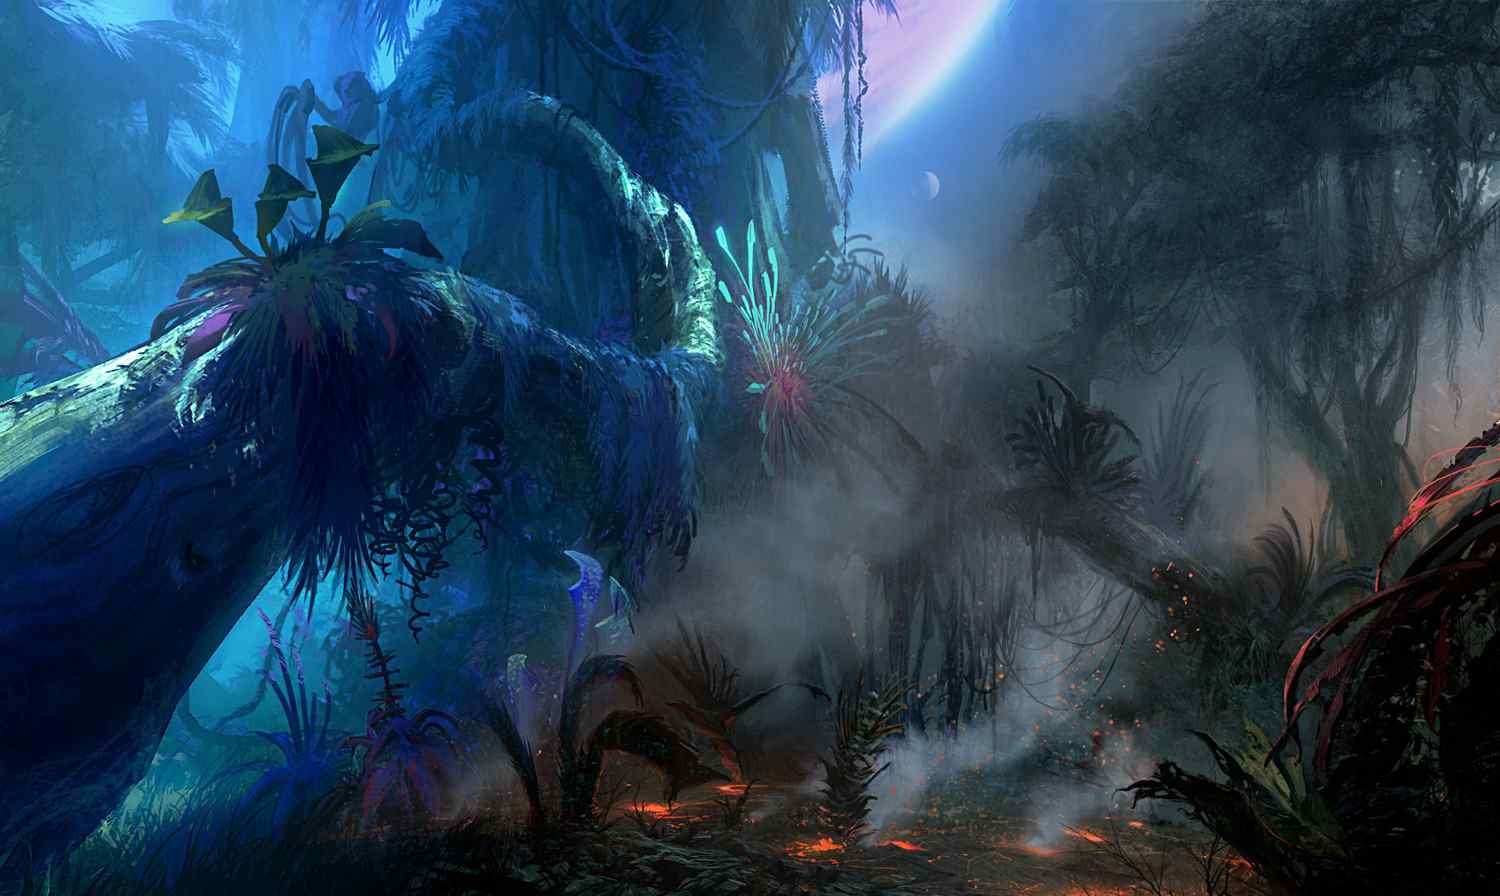  James Cameron's Avatar wallpapers. Click on each thumbnail for the 